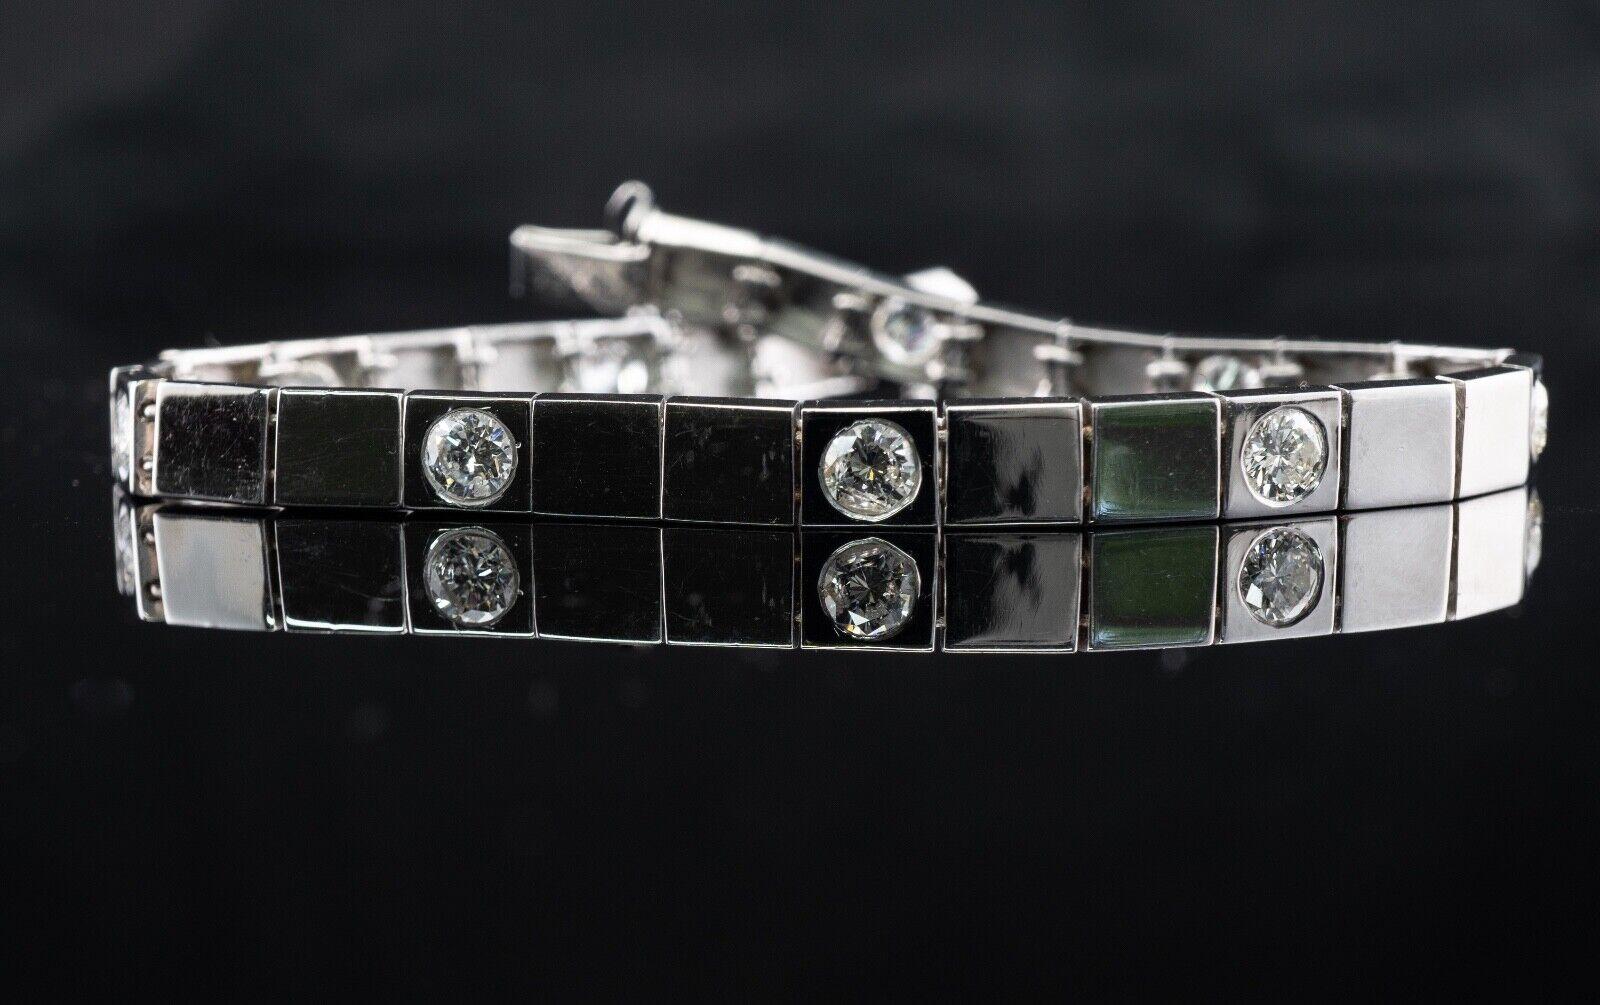 Diamond Bracelet 14K White Gold Link 2.70 TDW

This estate solid 14K White Gold bracelet is set with nine white and fiery round brilliant cut diamonds. The diamonds are SI2 clarity and HI color. The total weight is 2.70 carats. The bracelet has a